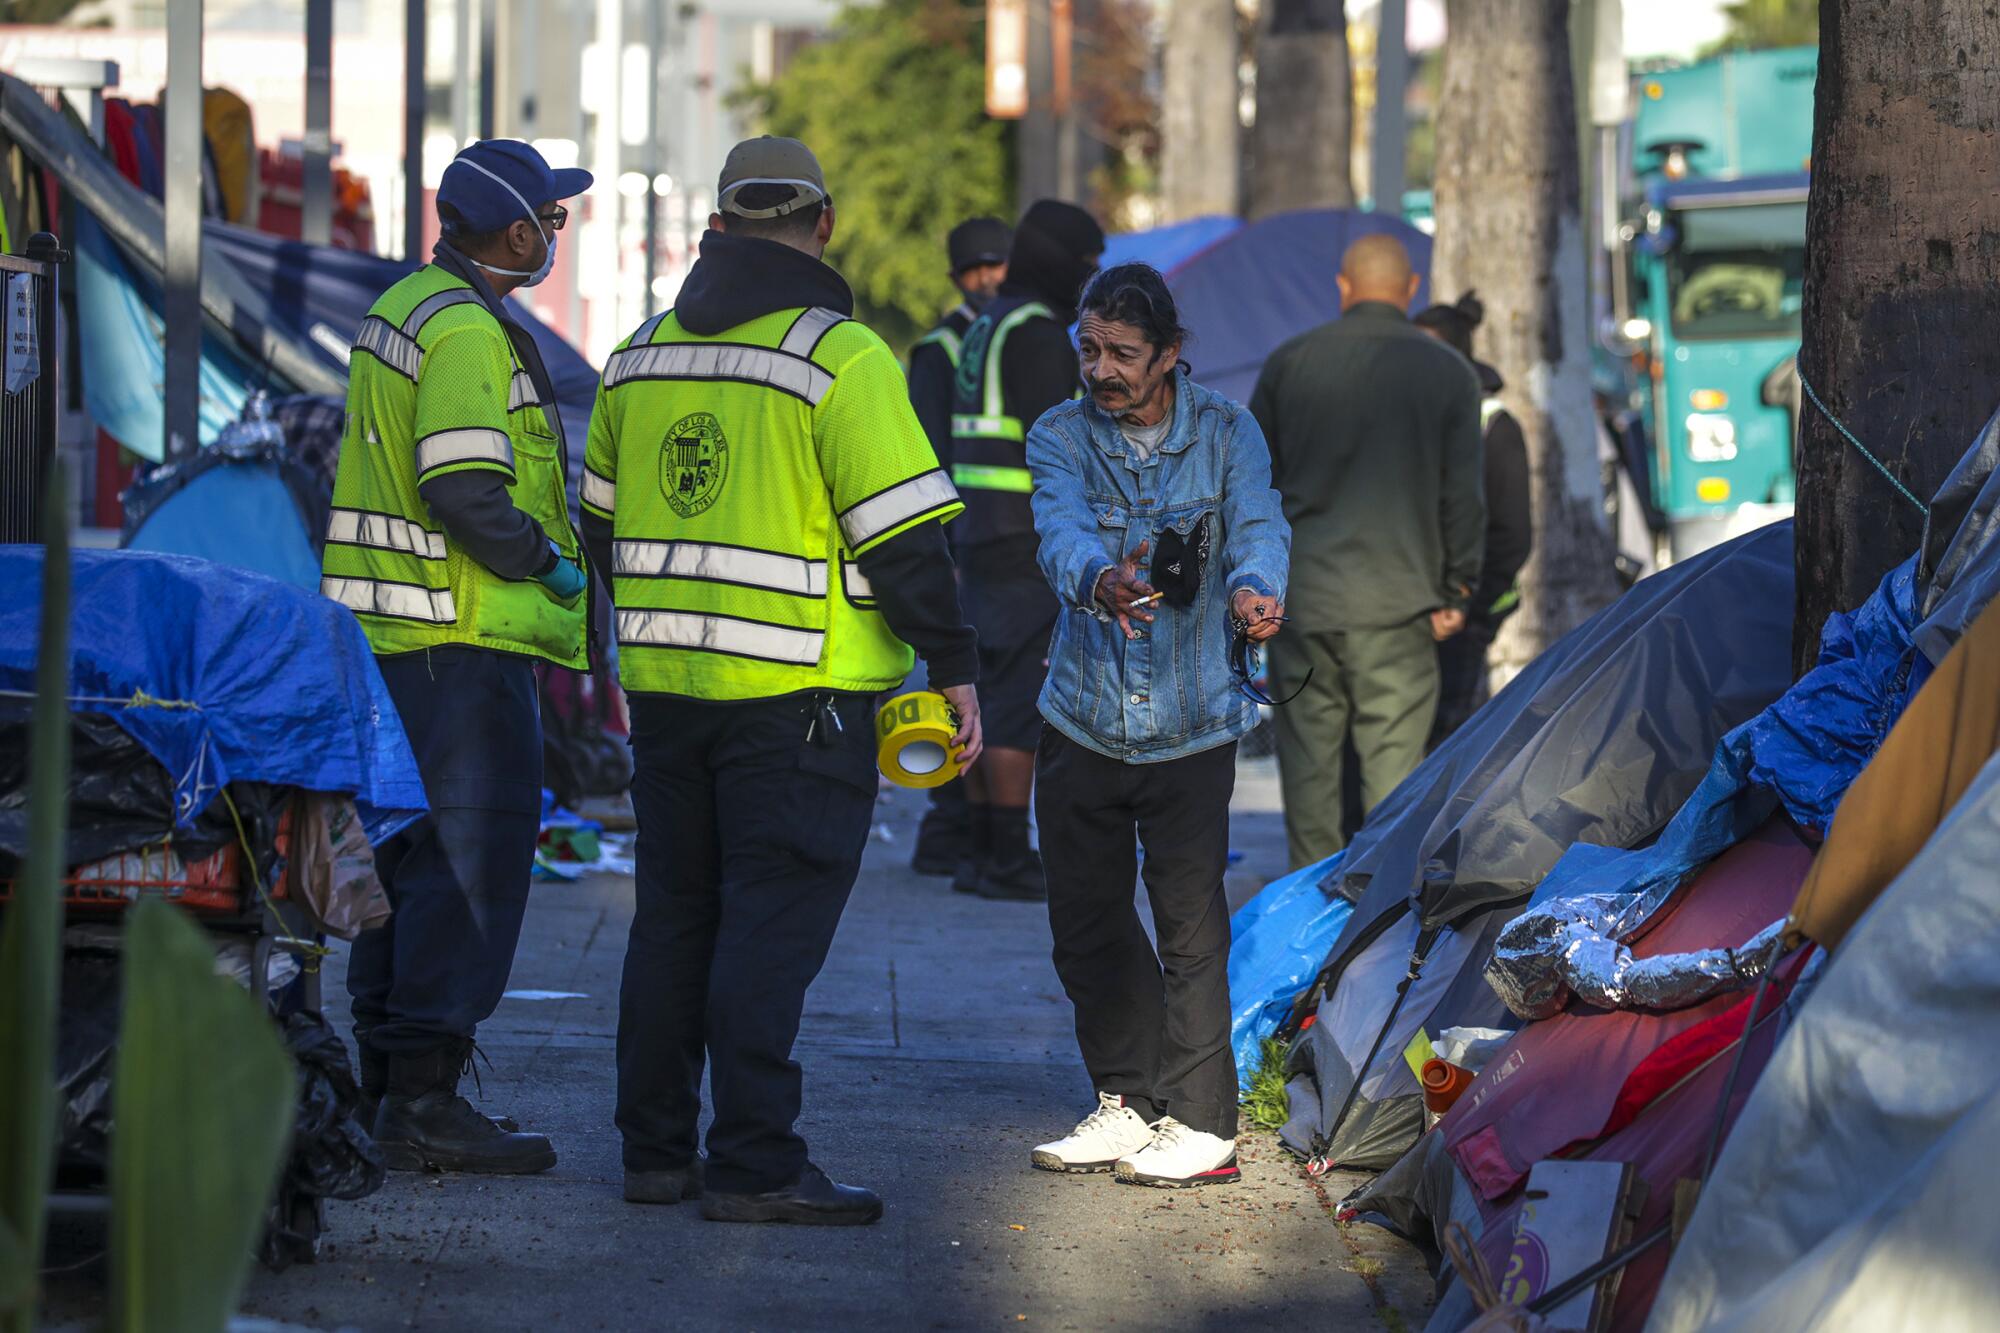 A man in a denim jacket points to his tent as he talks with city workers in yellow vests.